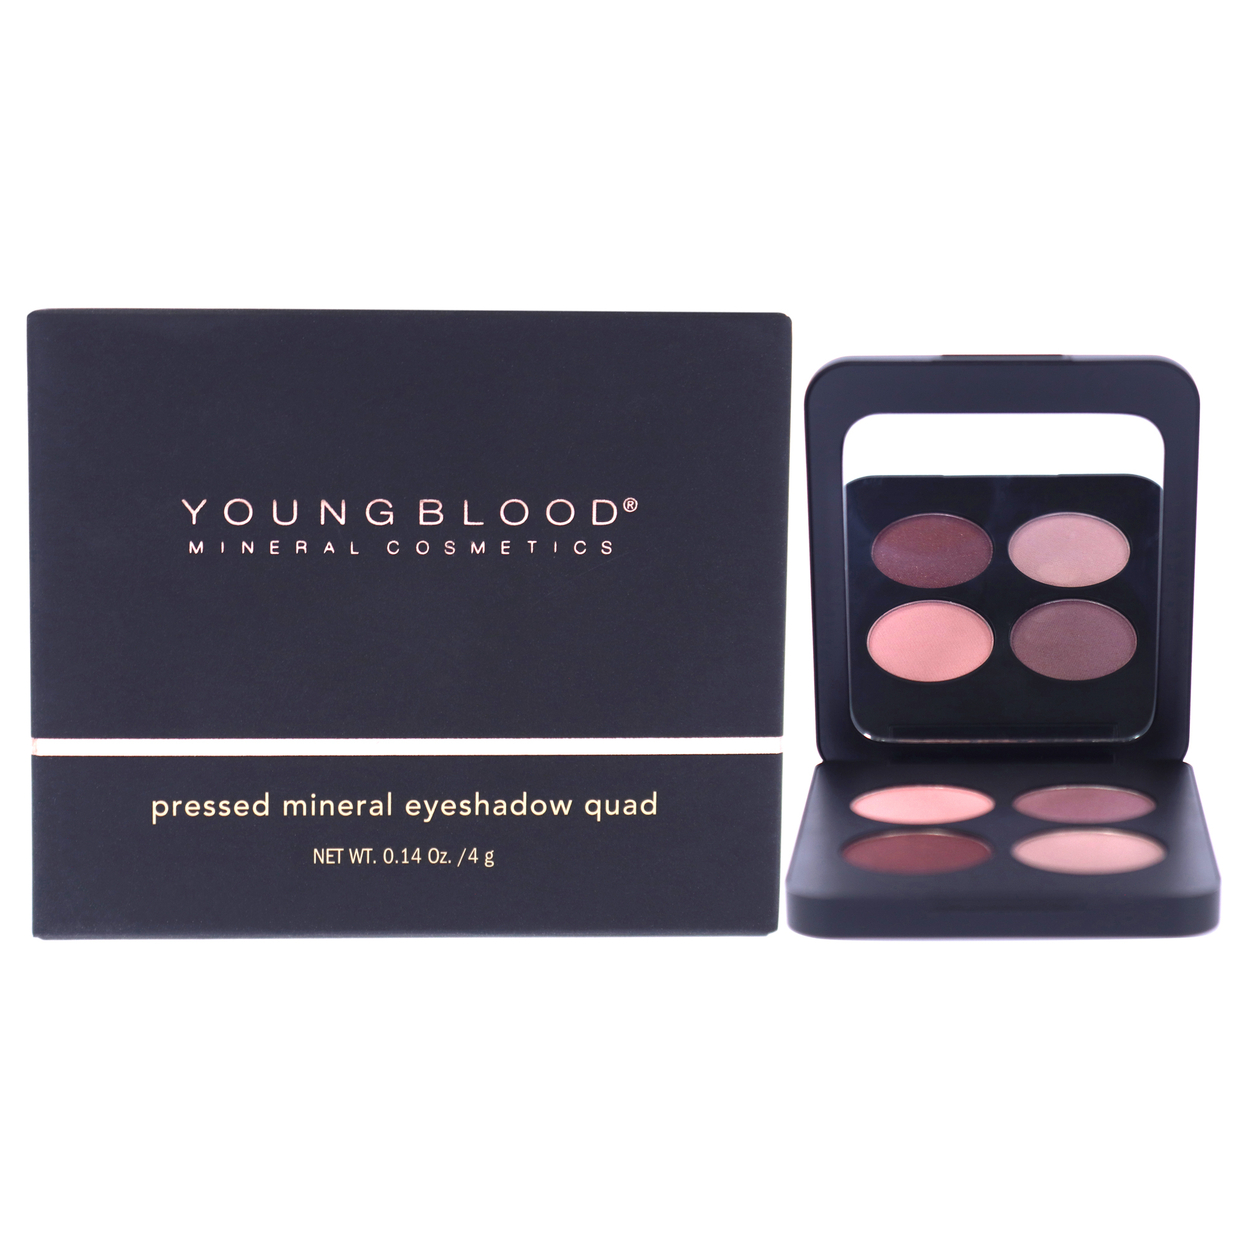 Youngblood Women COSMETIC Pressed Mineral Eyeshadow Quad - Vintage 0.14 Oz